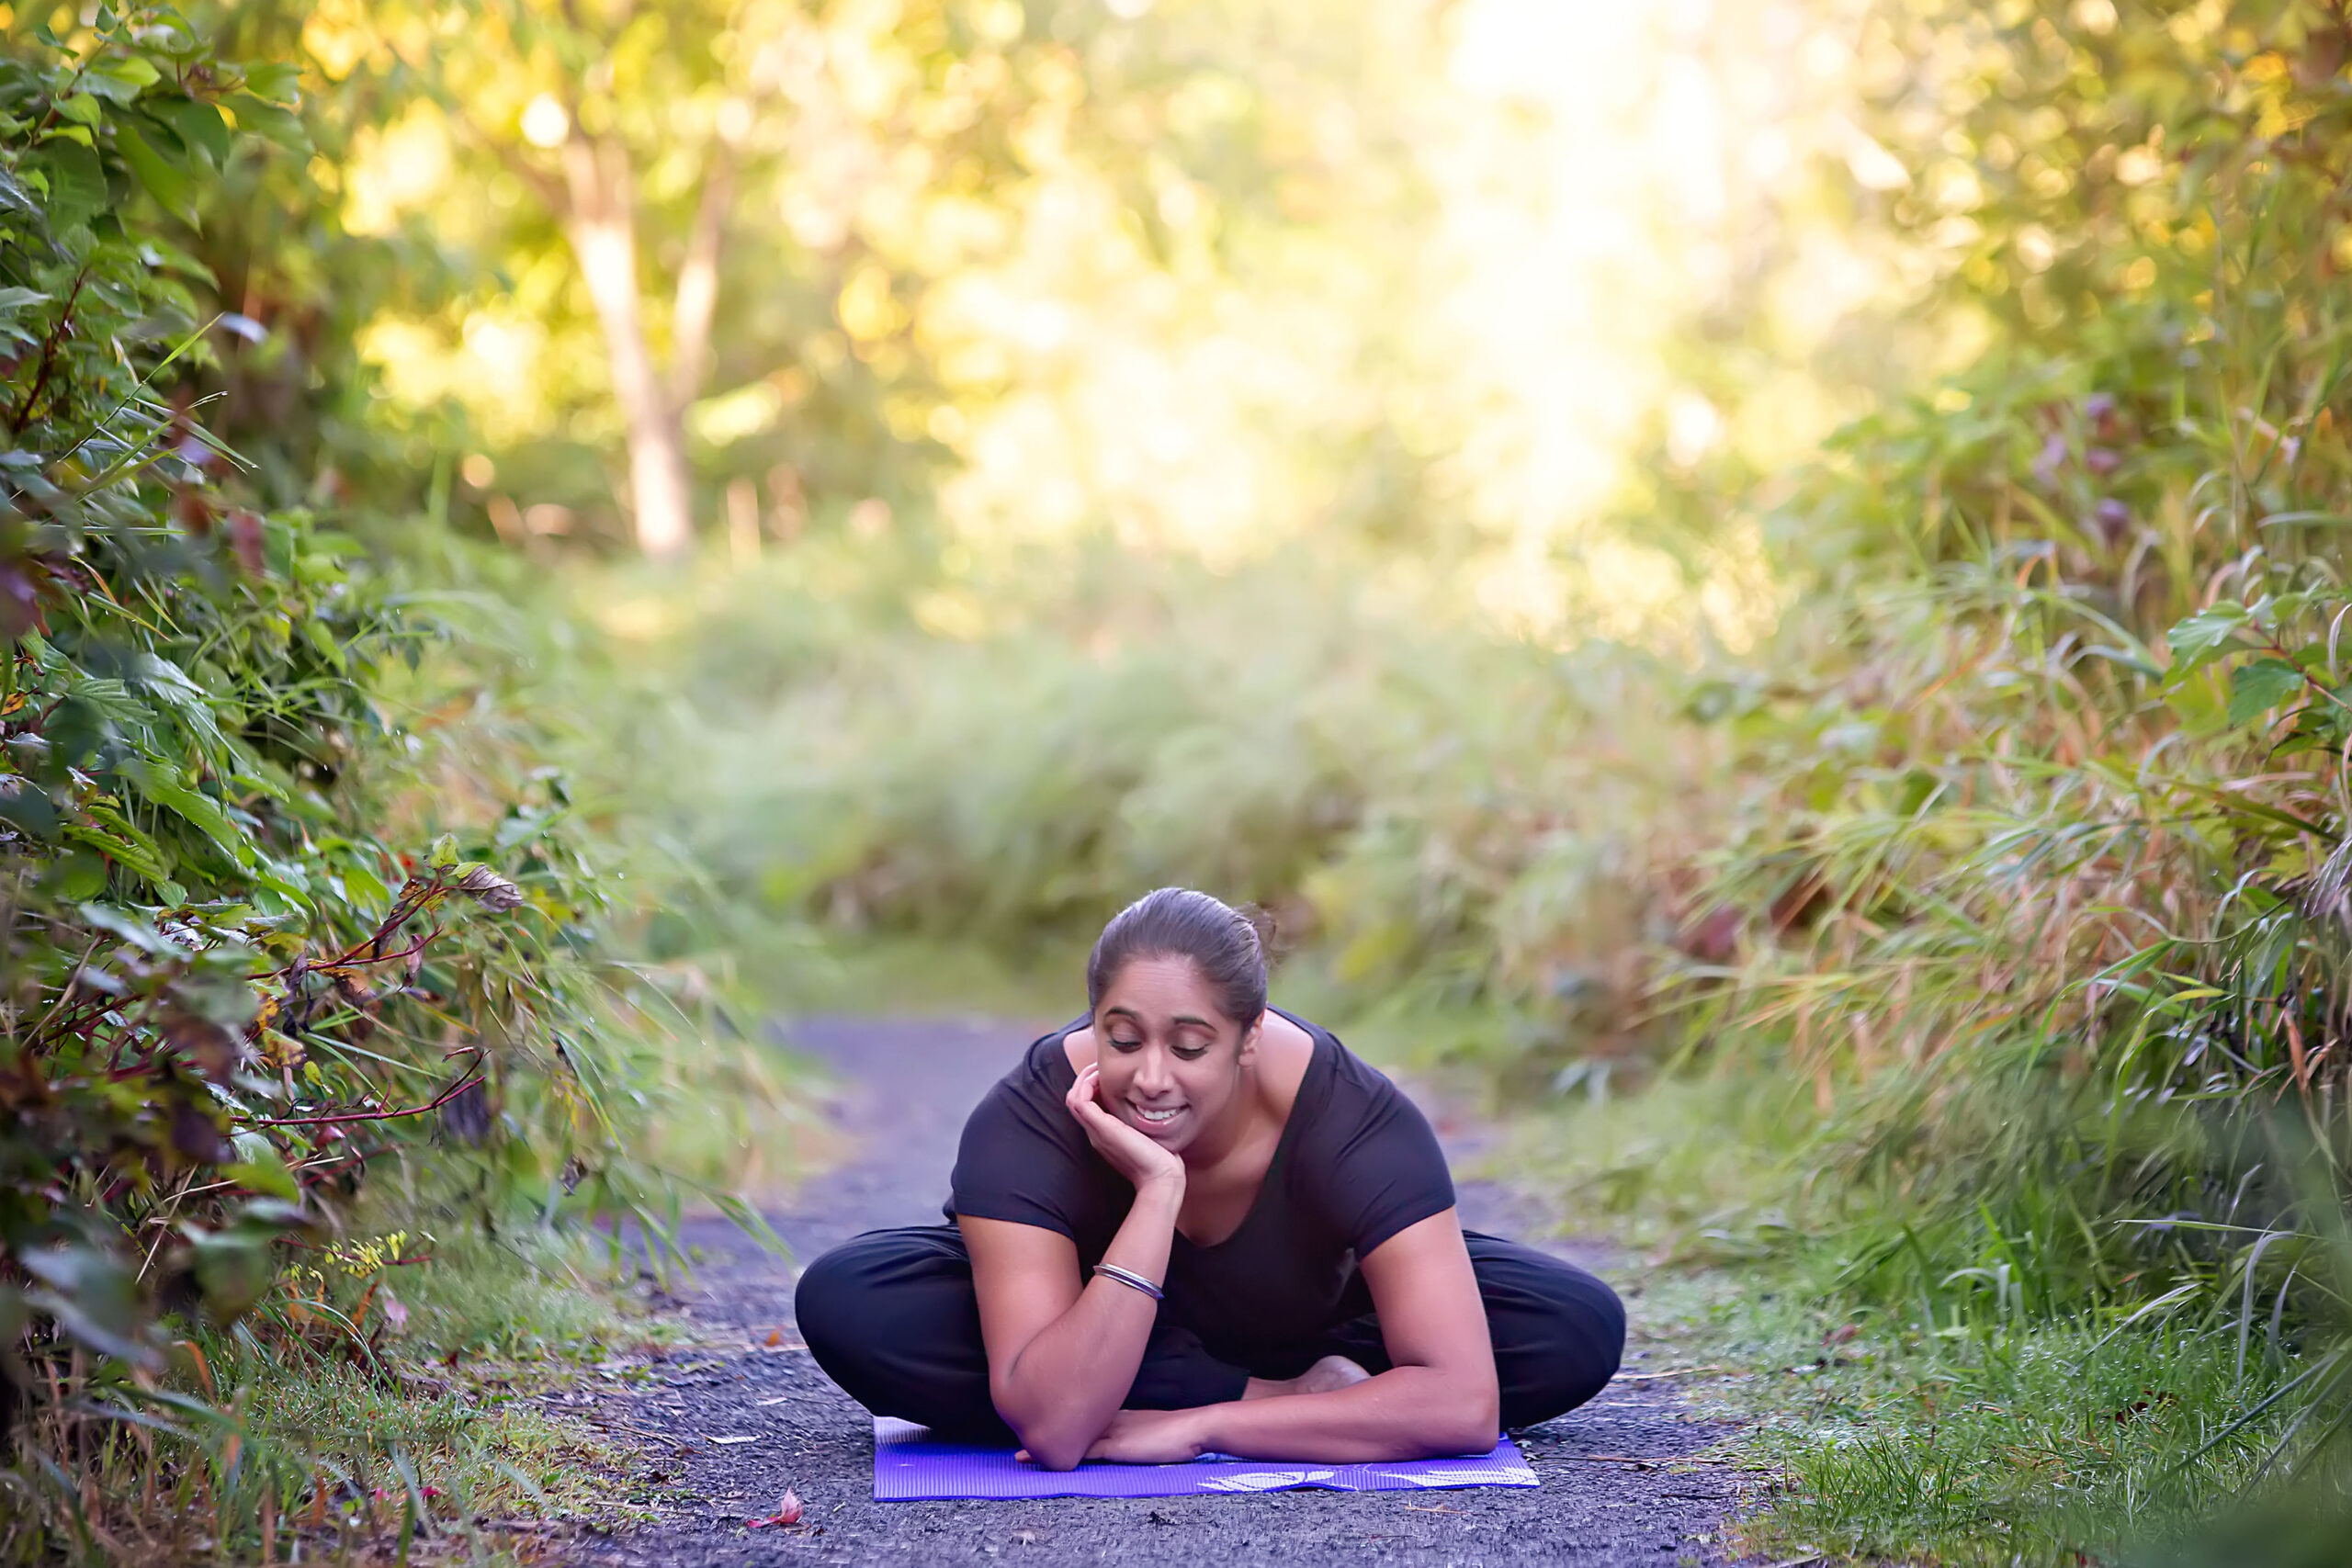 Jas sitting on a yoga mat in the middle of nature while smiling 